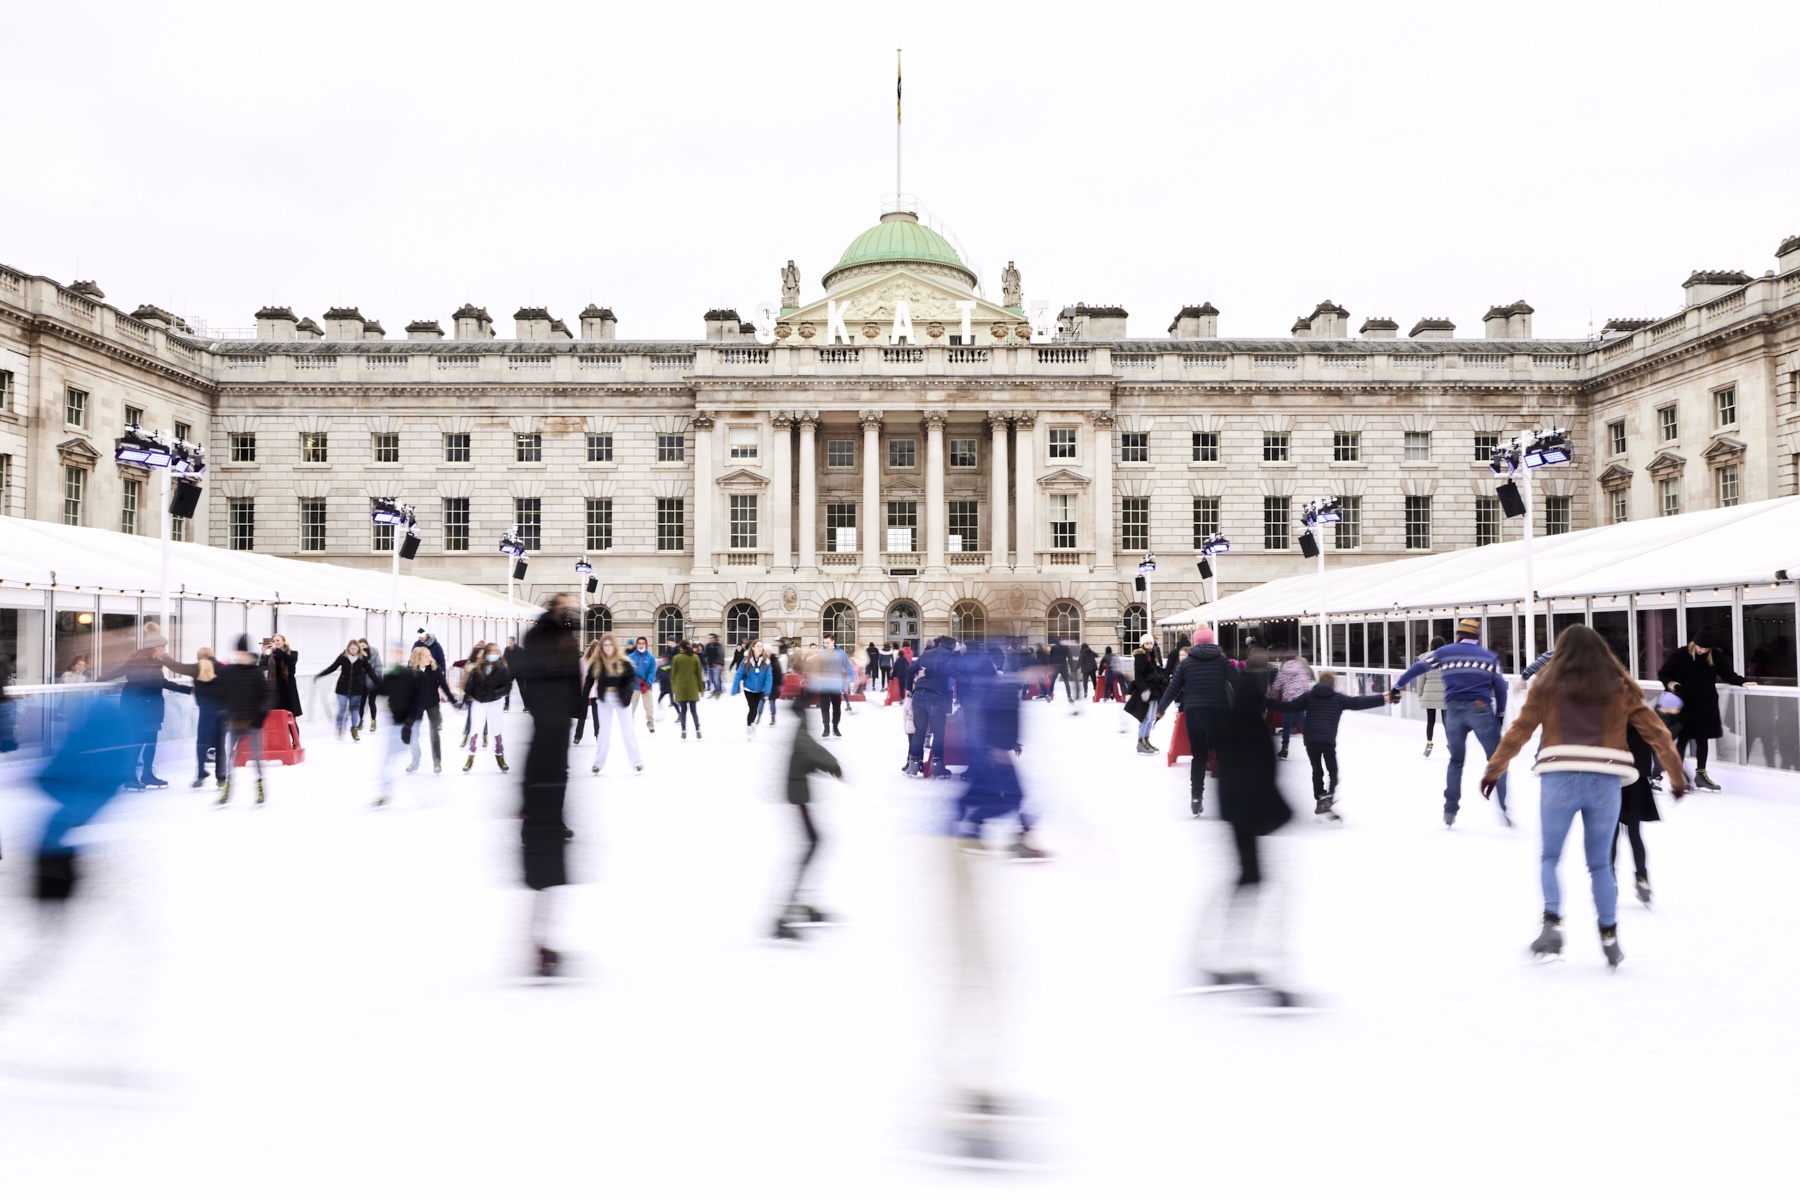 The Wick - 1. Skate at Somerset House with Moët & Chandon 2022. Image by Owen Harvey